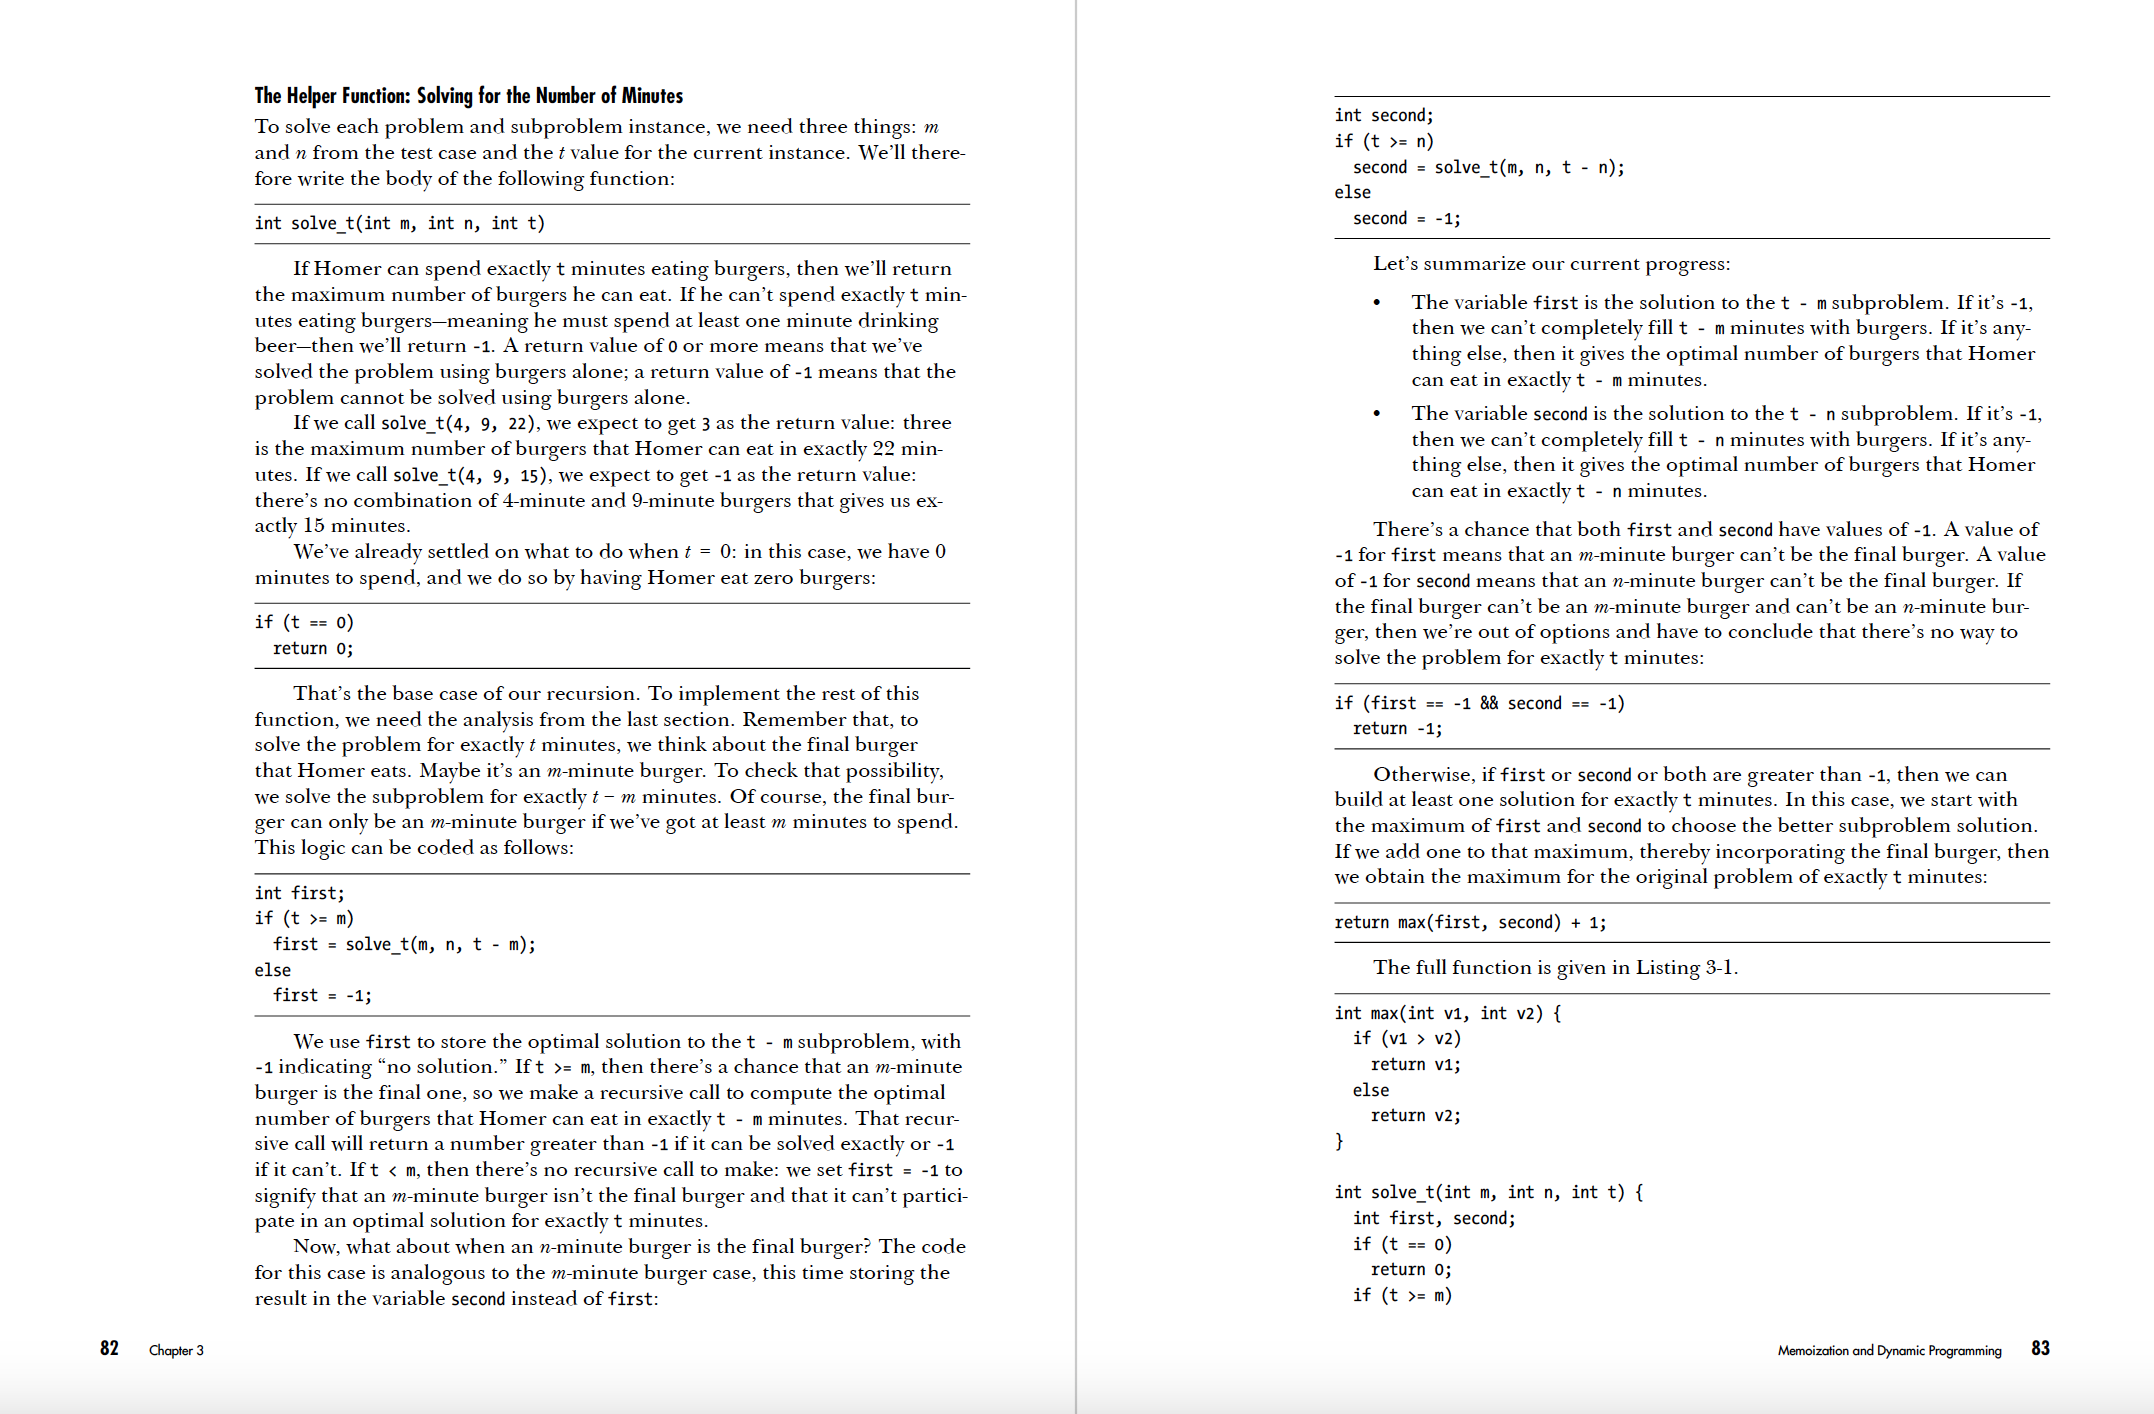 Algorithmic Thinking 2E pages 82-83